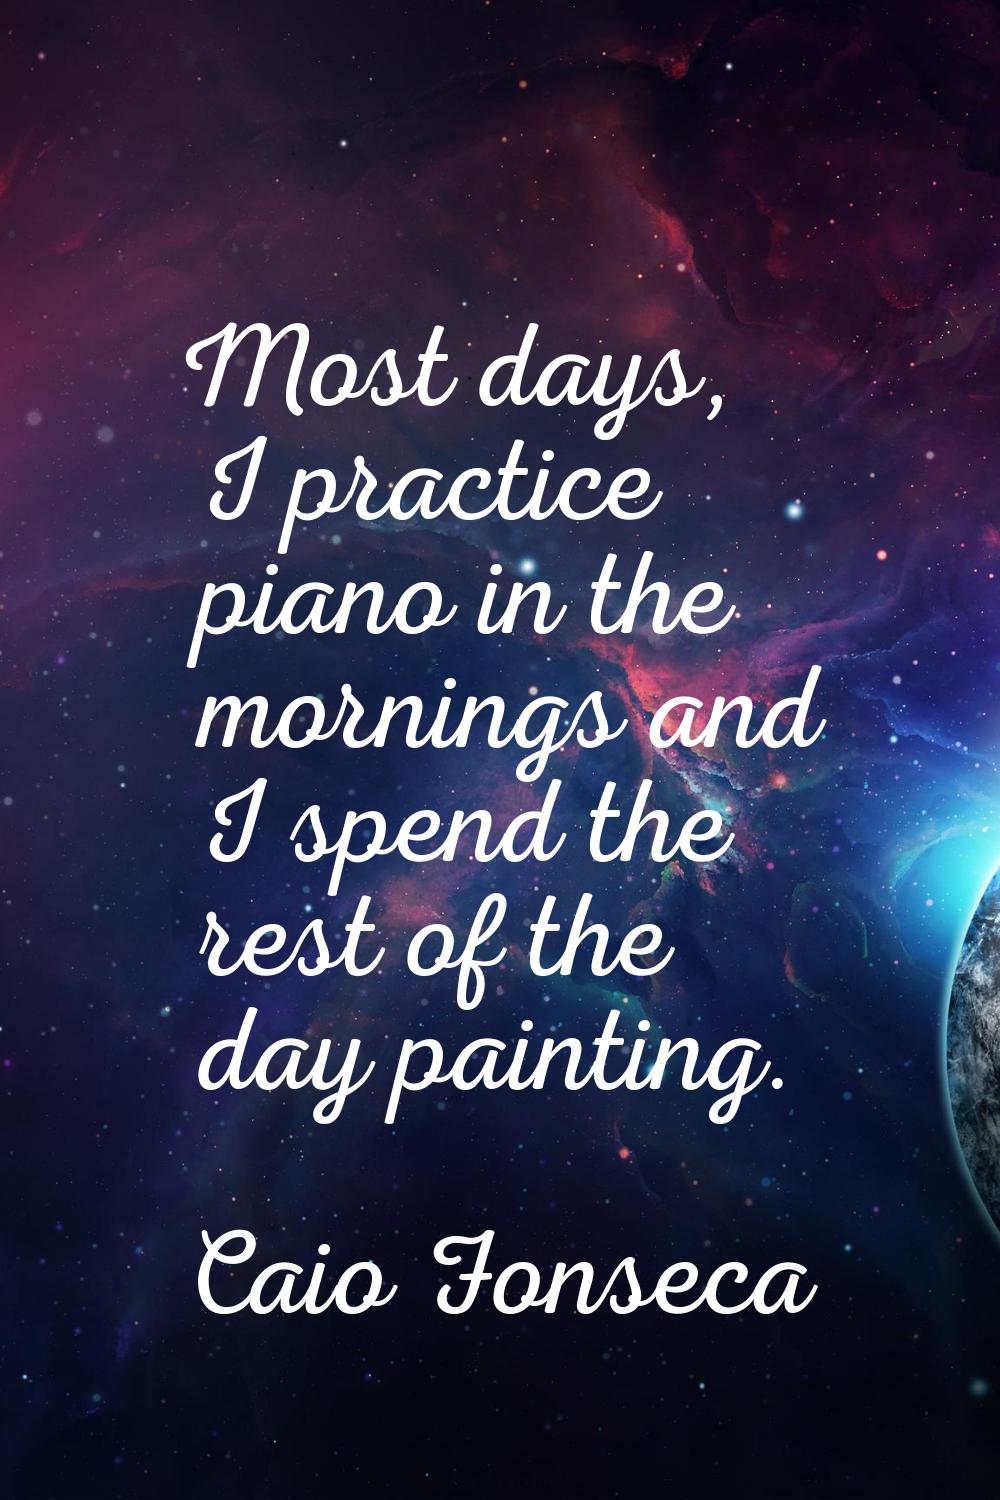 Most days, I practice piano in the mornings and I spend the rest of the day painting.